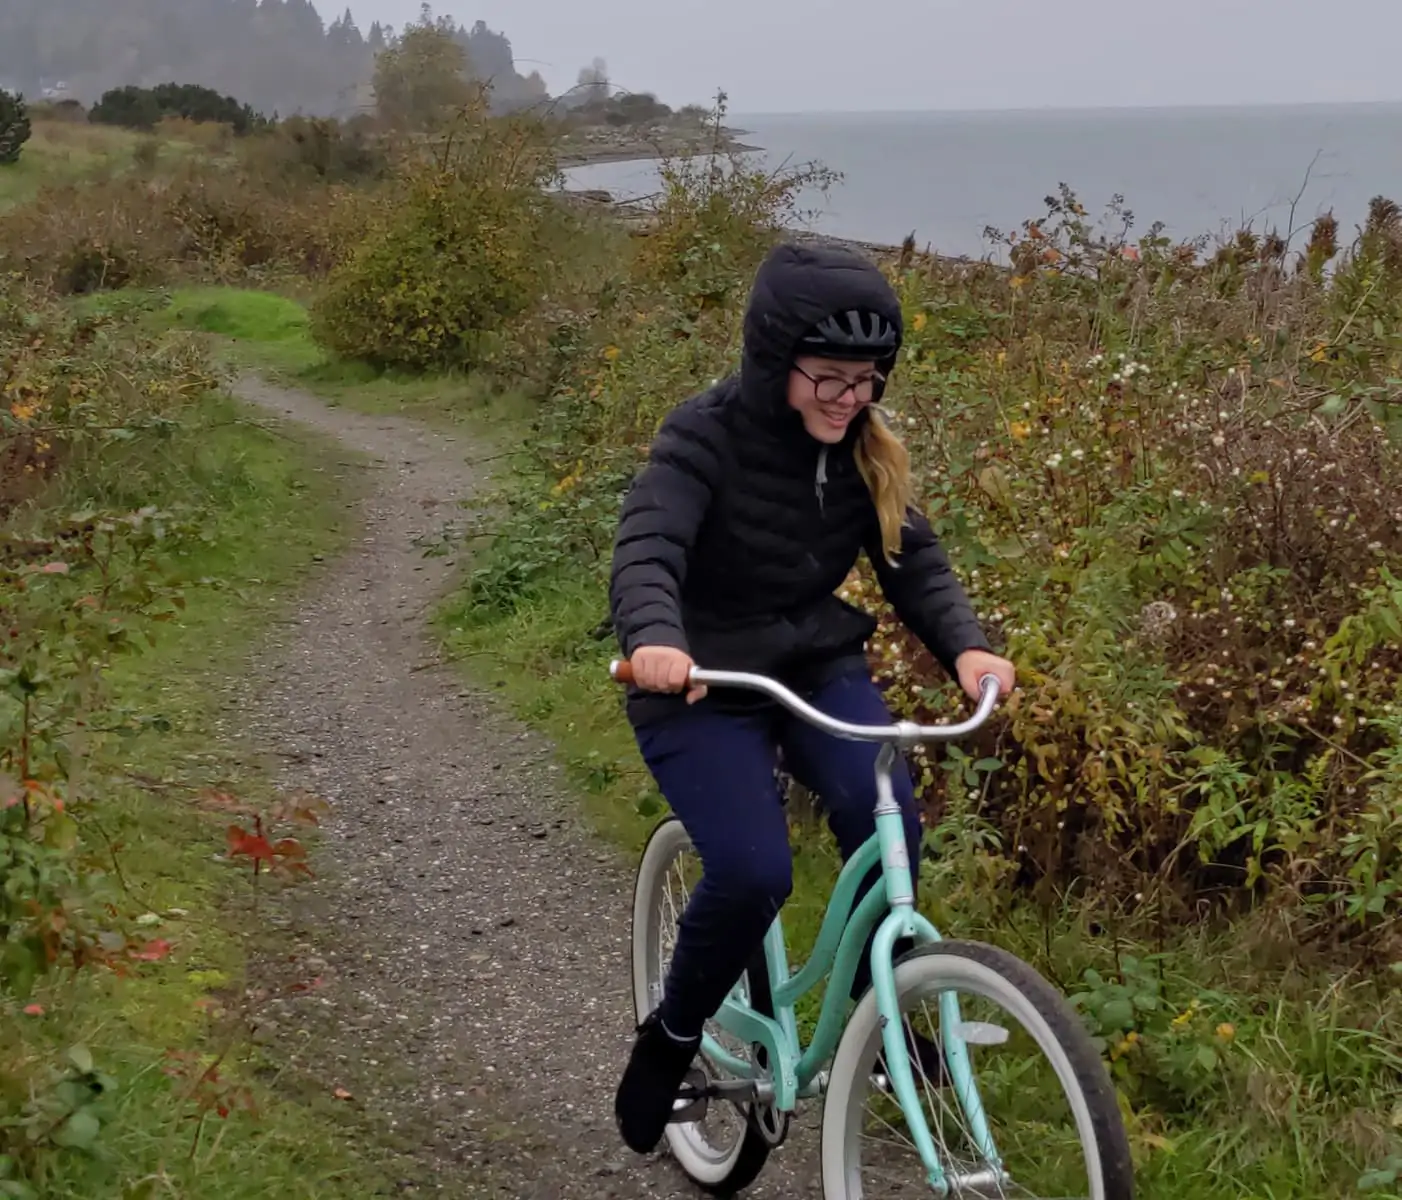 Bicycling on Semiahmoo Spit